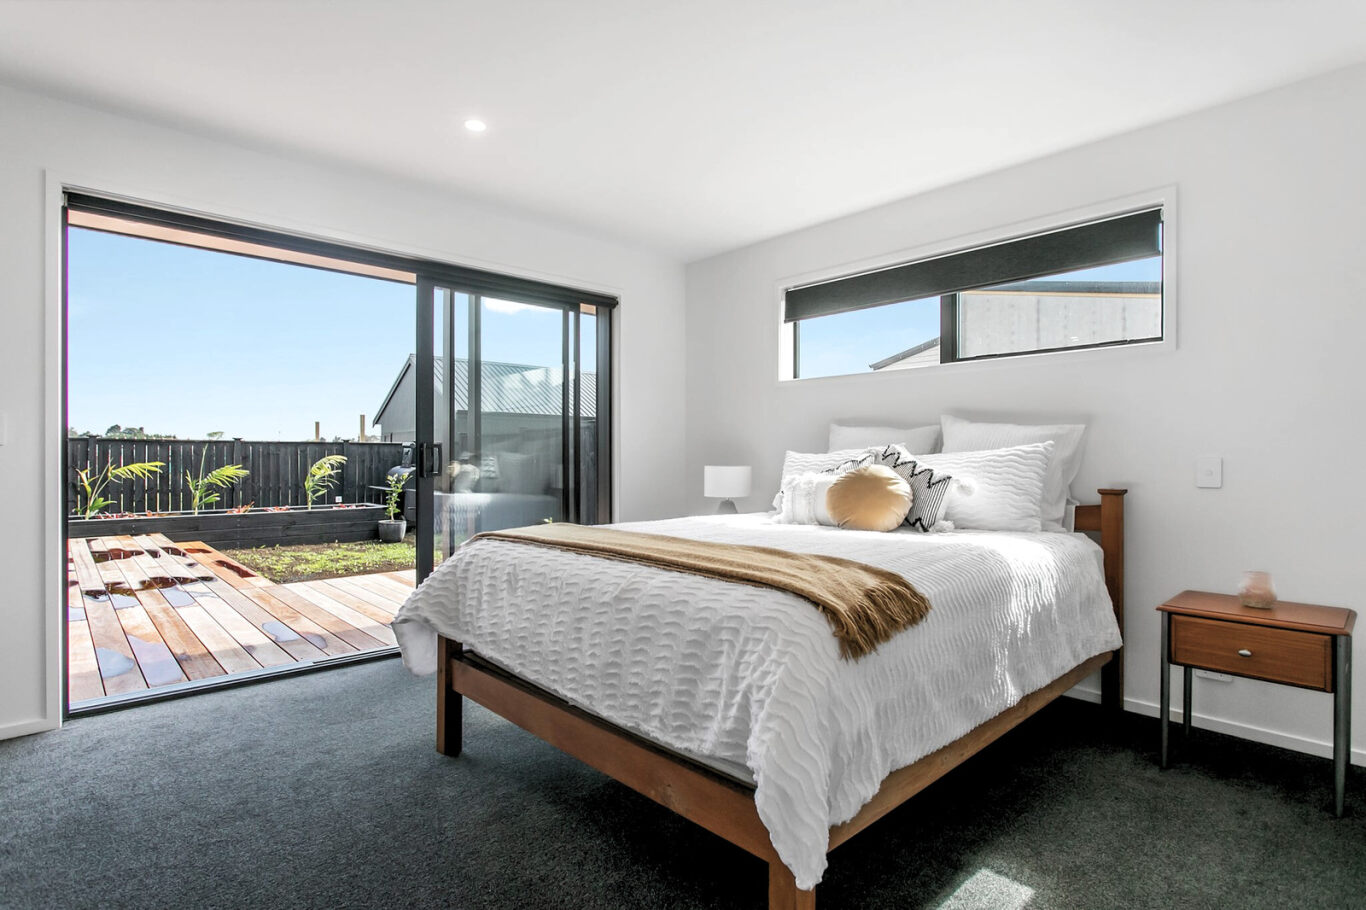 bedroom bed and door new build home at paerata rise